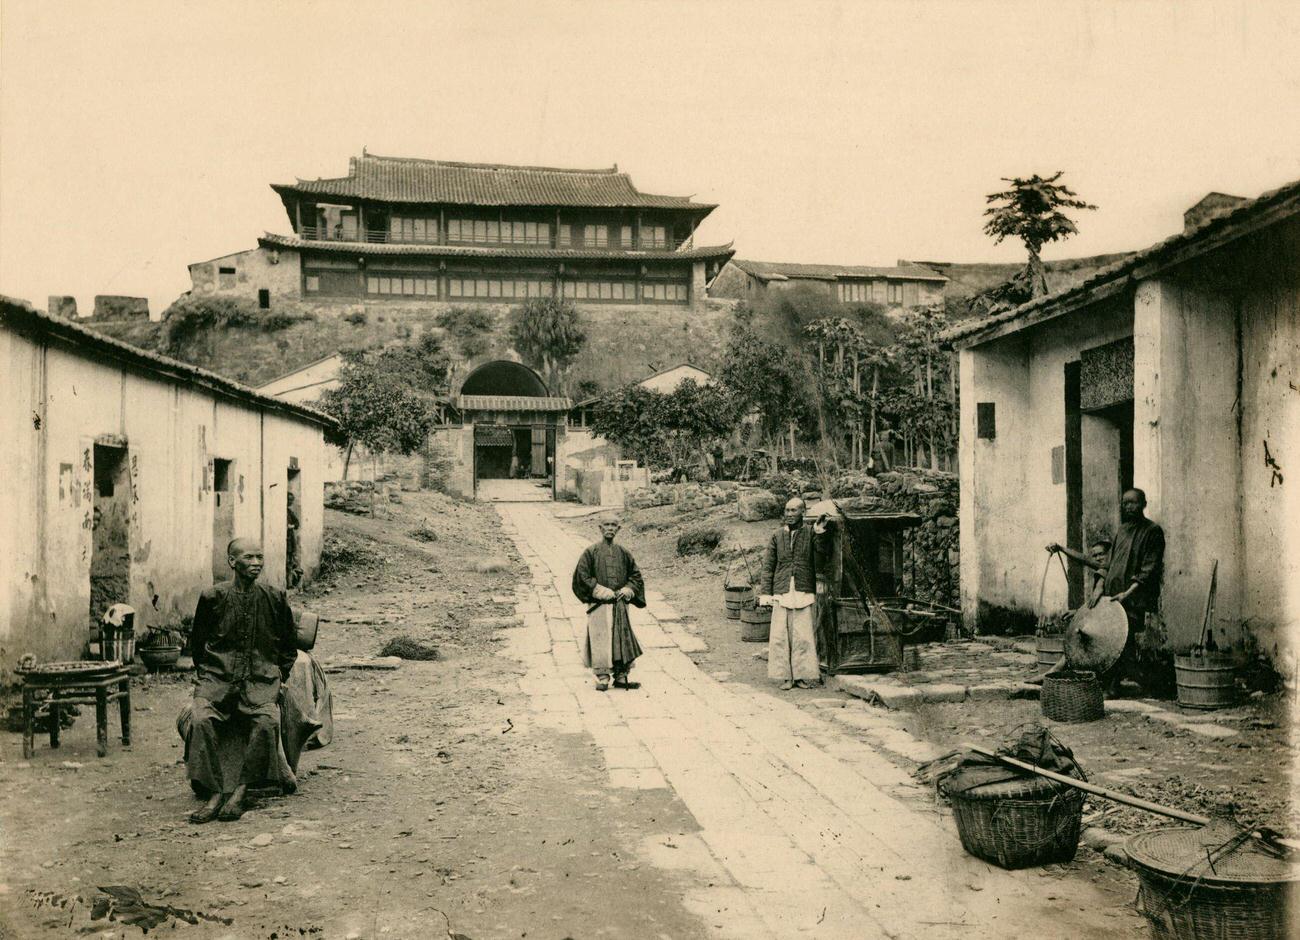 Village in Kowloon, Opposite Hong Kong, 1872